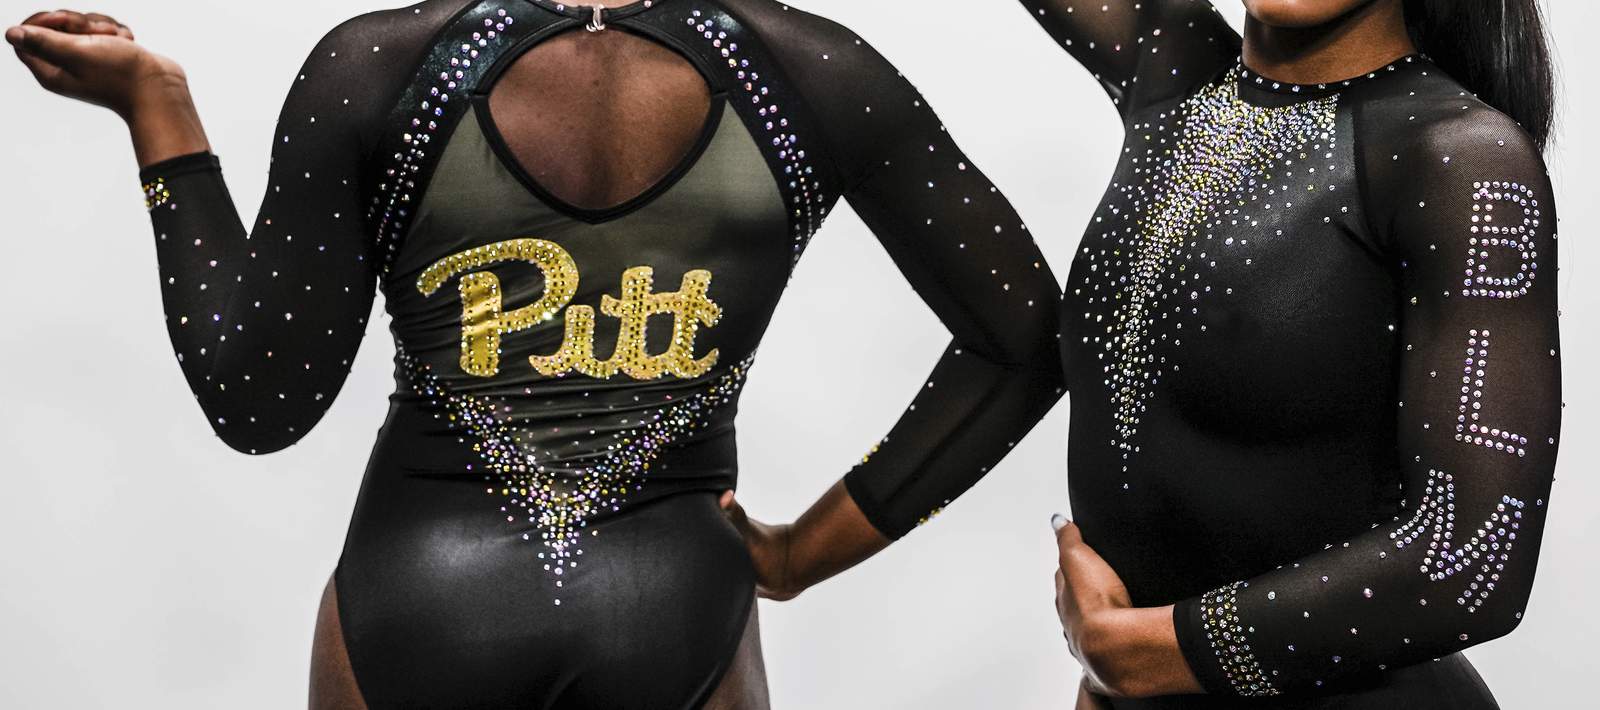 Viral and vital, college gymnasts finding their voice